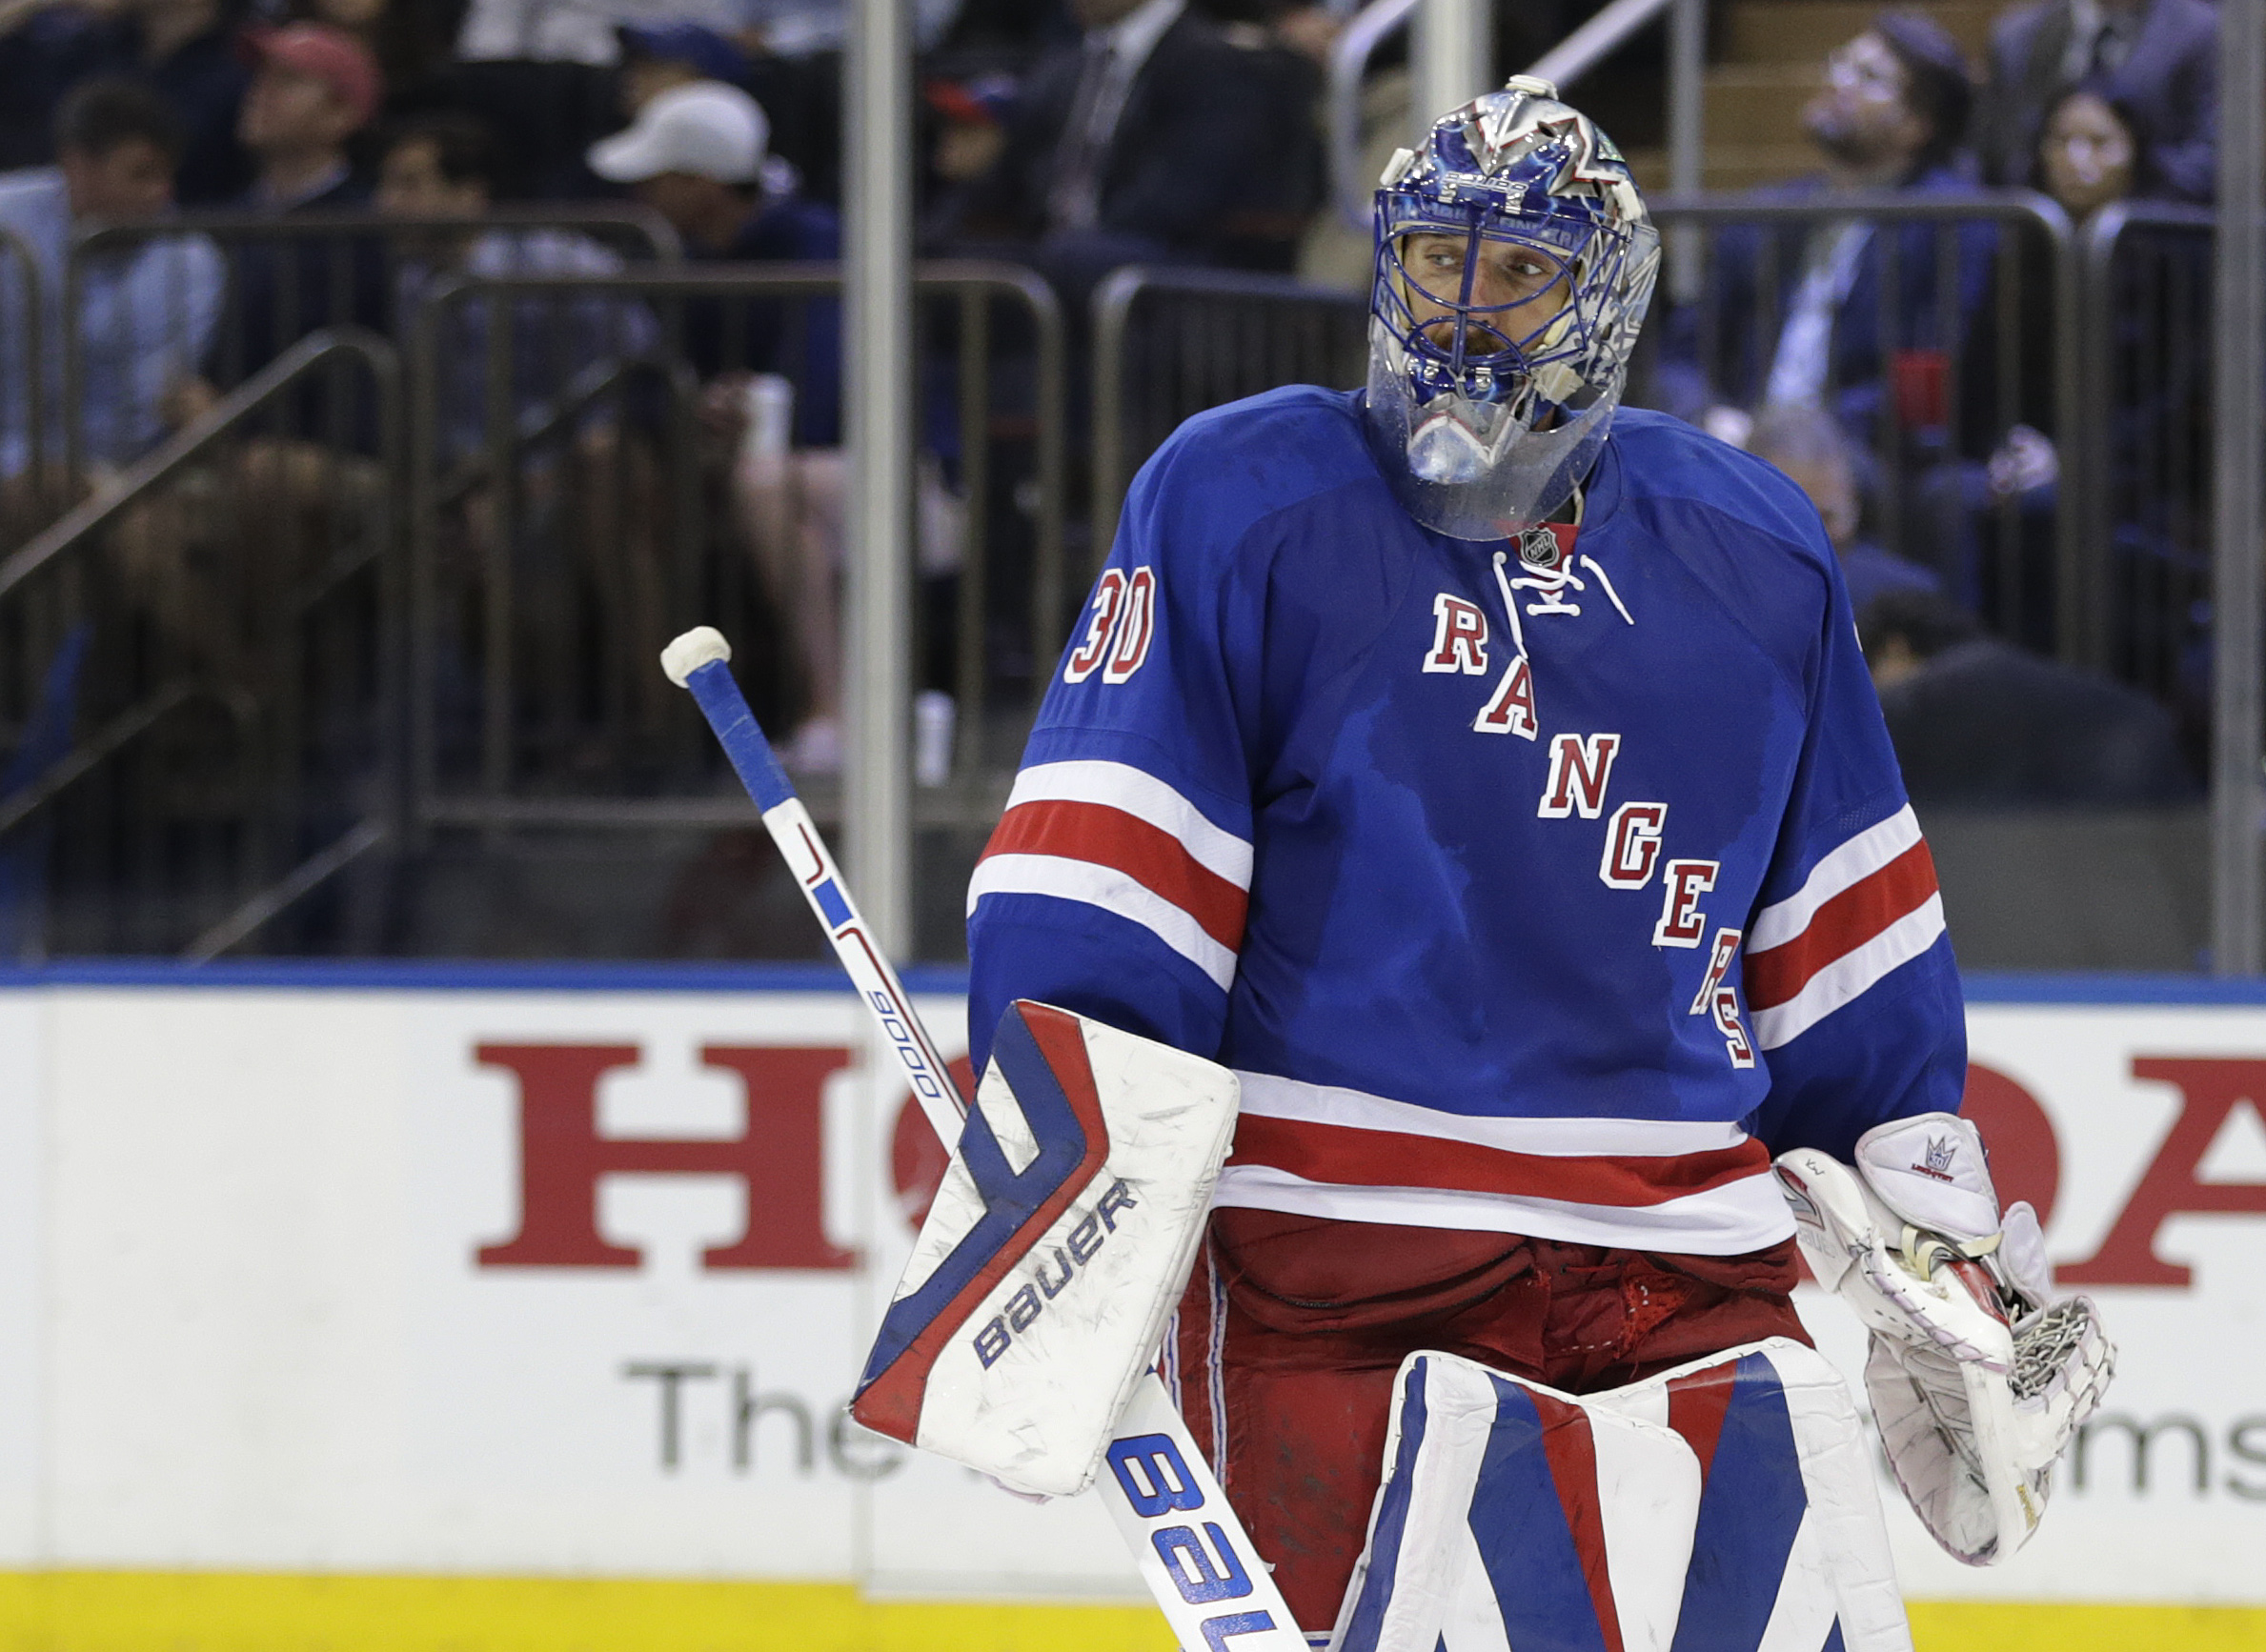 New York Rangers goalie Henrik Lundqvist (30) skates back to the crease during a break in play against the Tampa Bay Lightning during the third period of Game 5 of the Eastern Conference final during the NHL hockey Stanley Cup playoffs, Sunday, May 24, 2015, in New York. The Lightning won 2-0. (AP Photo/Frank Franklin)